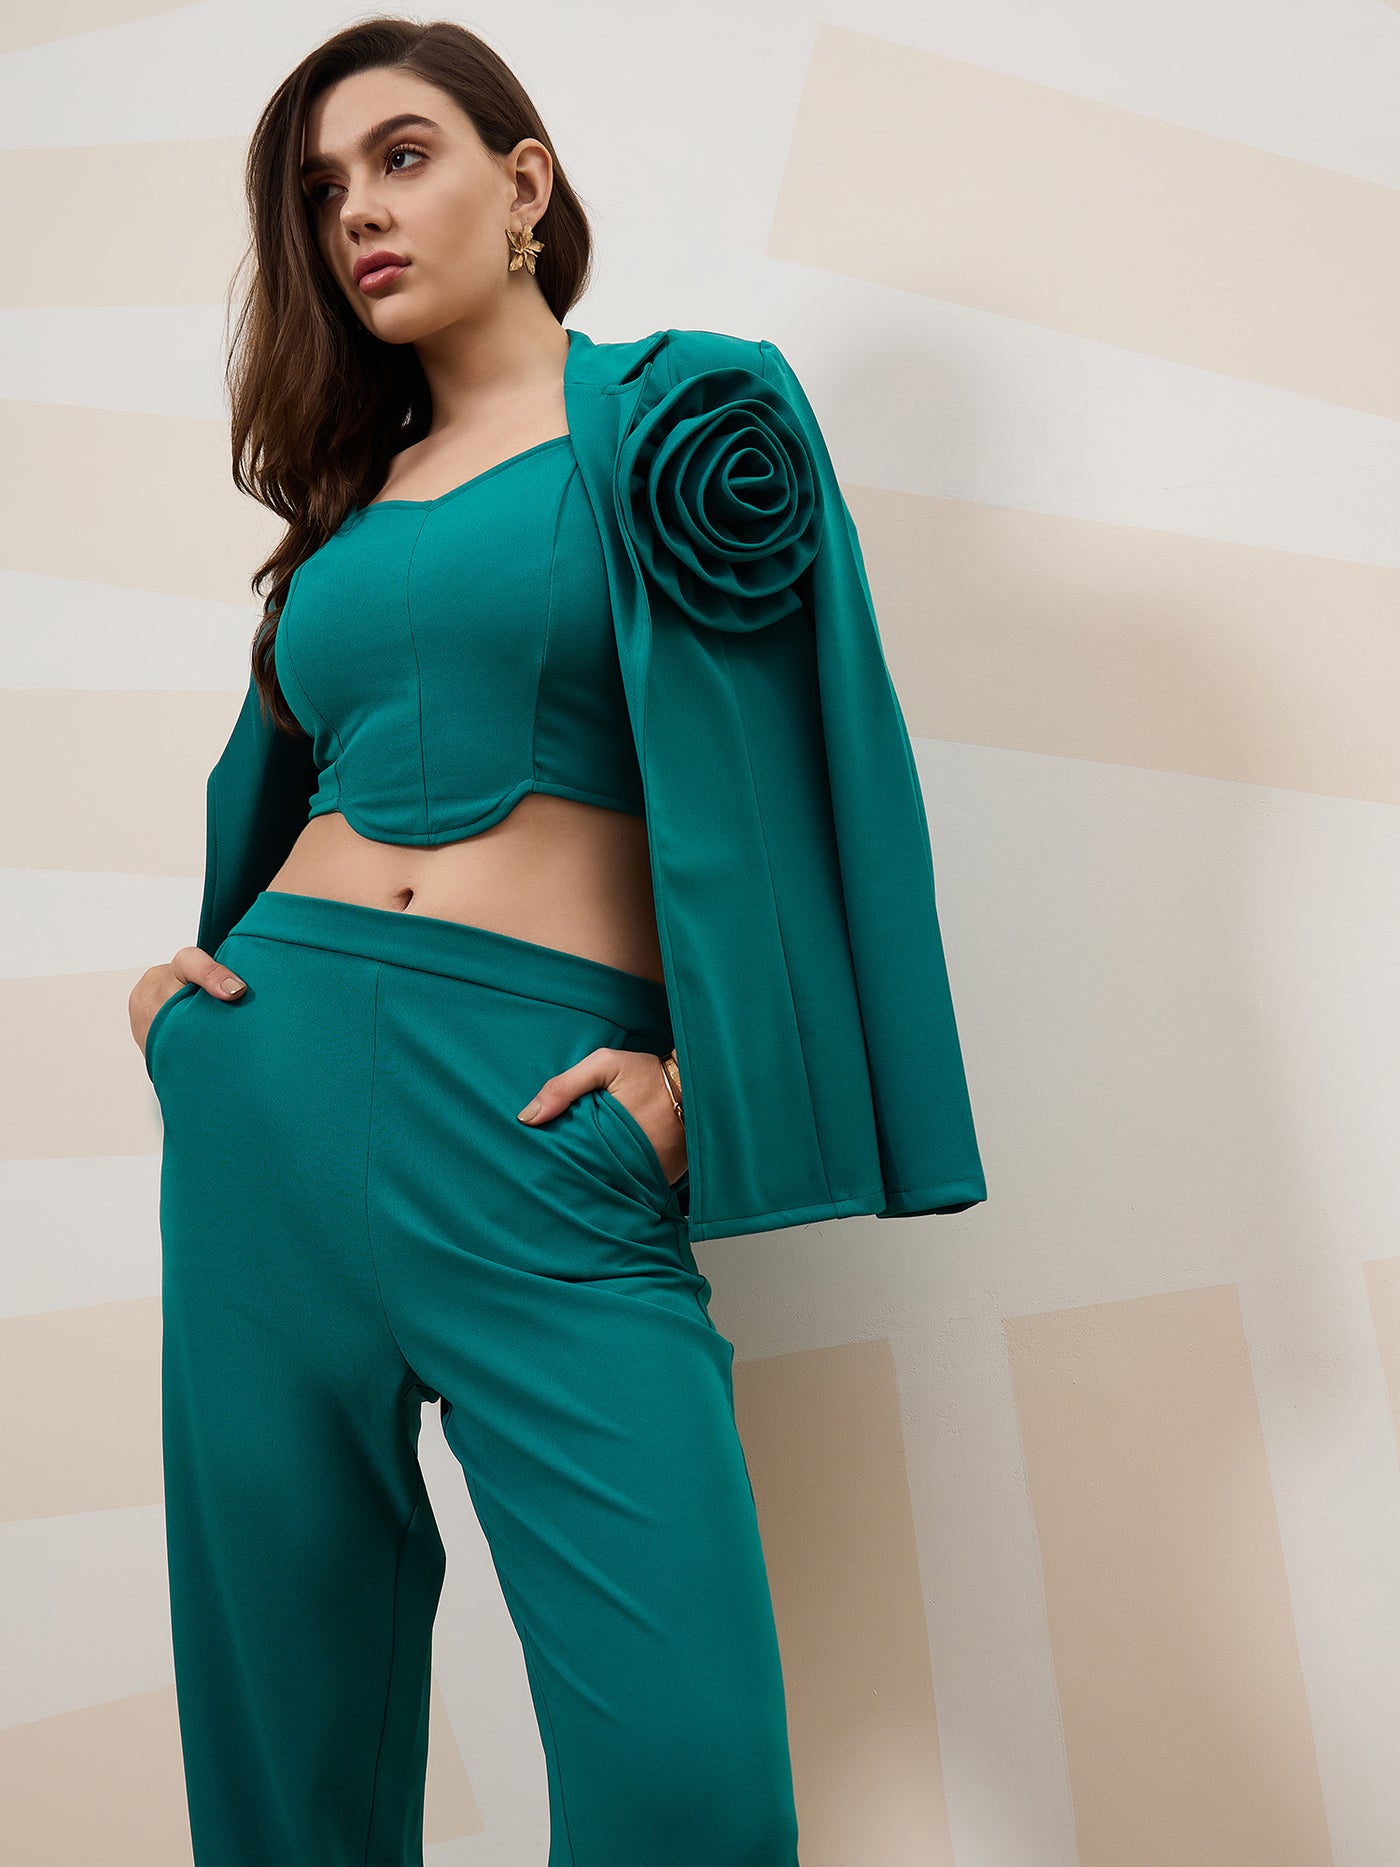 Shally Bhasin by Athena Top & Trousers Co-Ords With Blazer